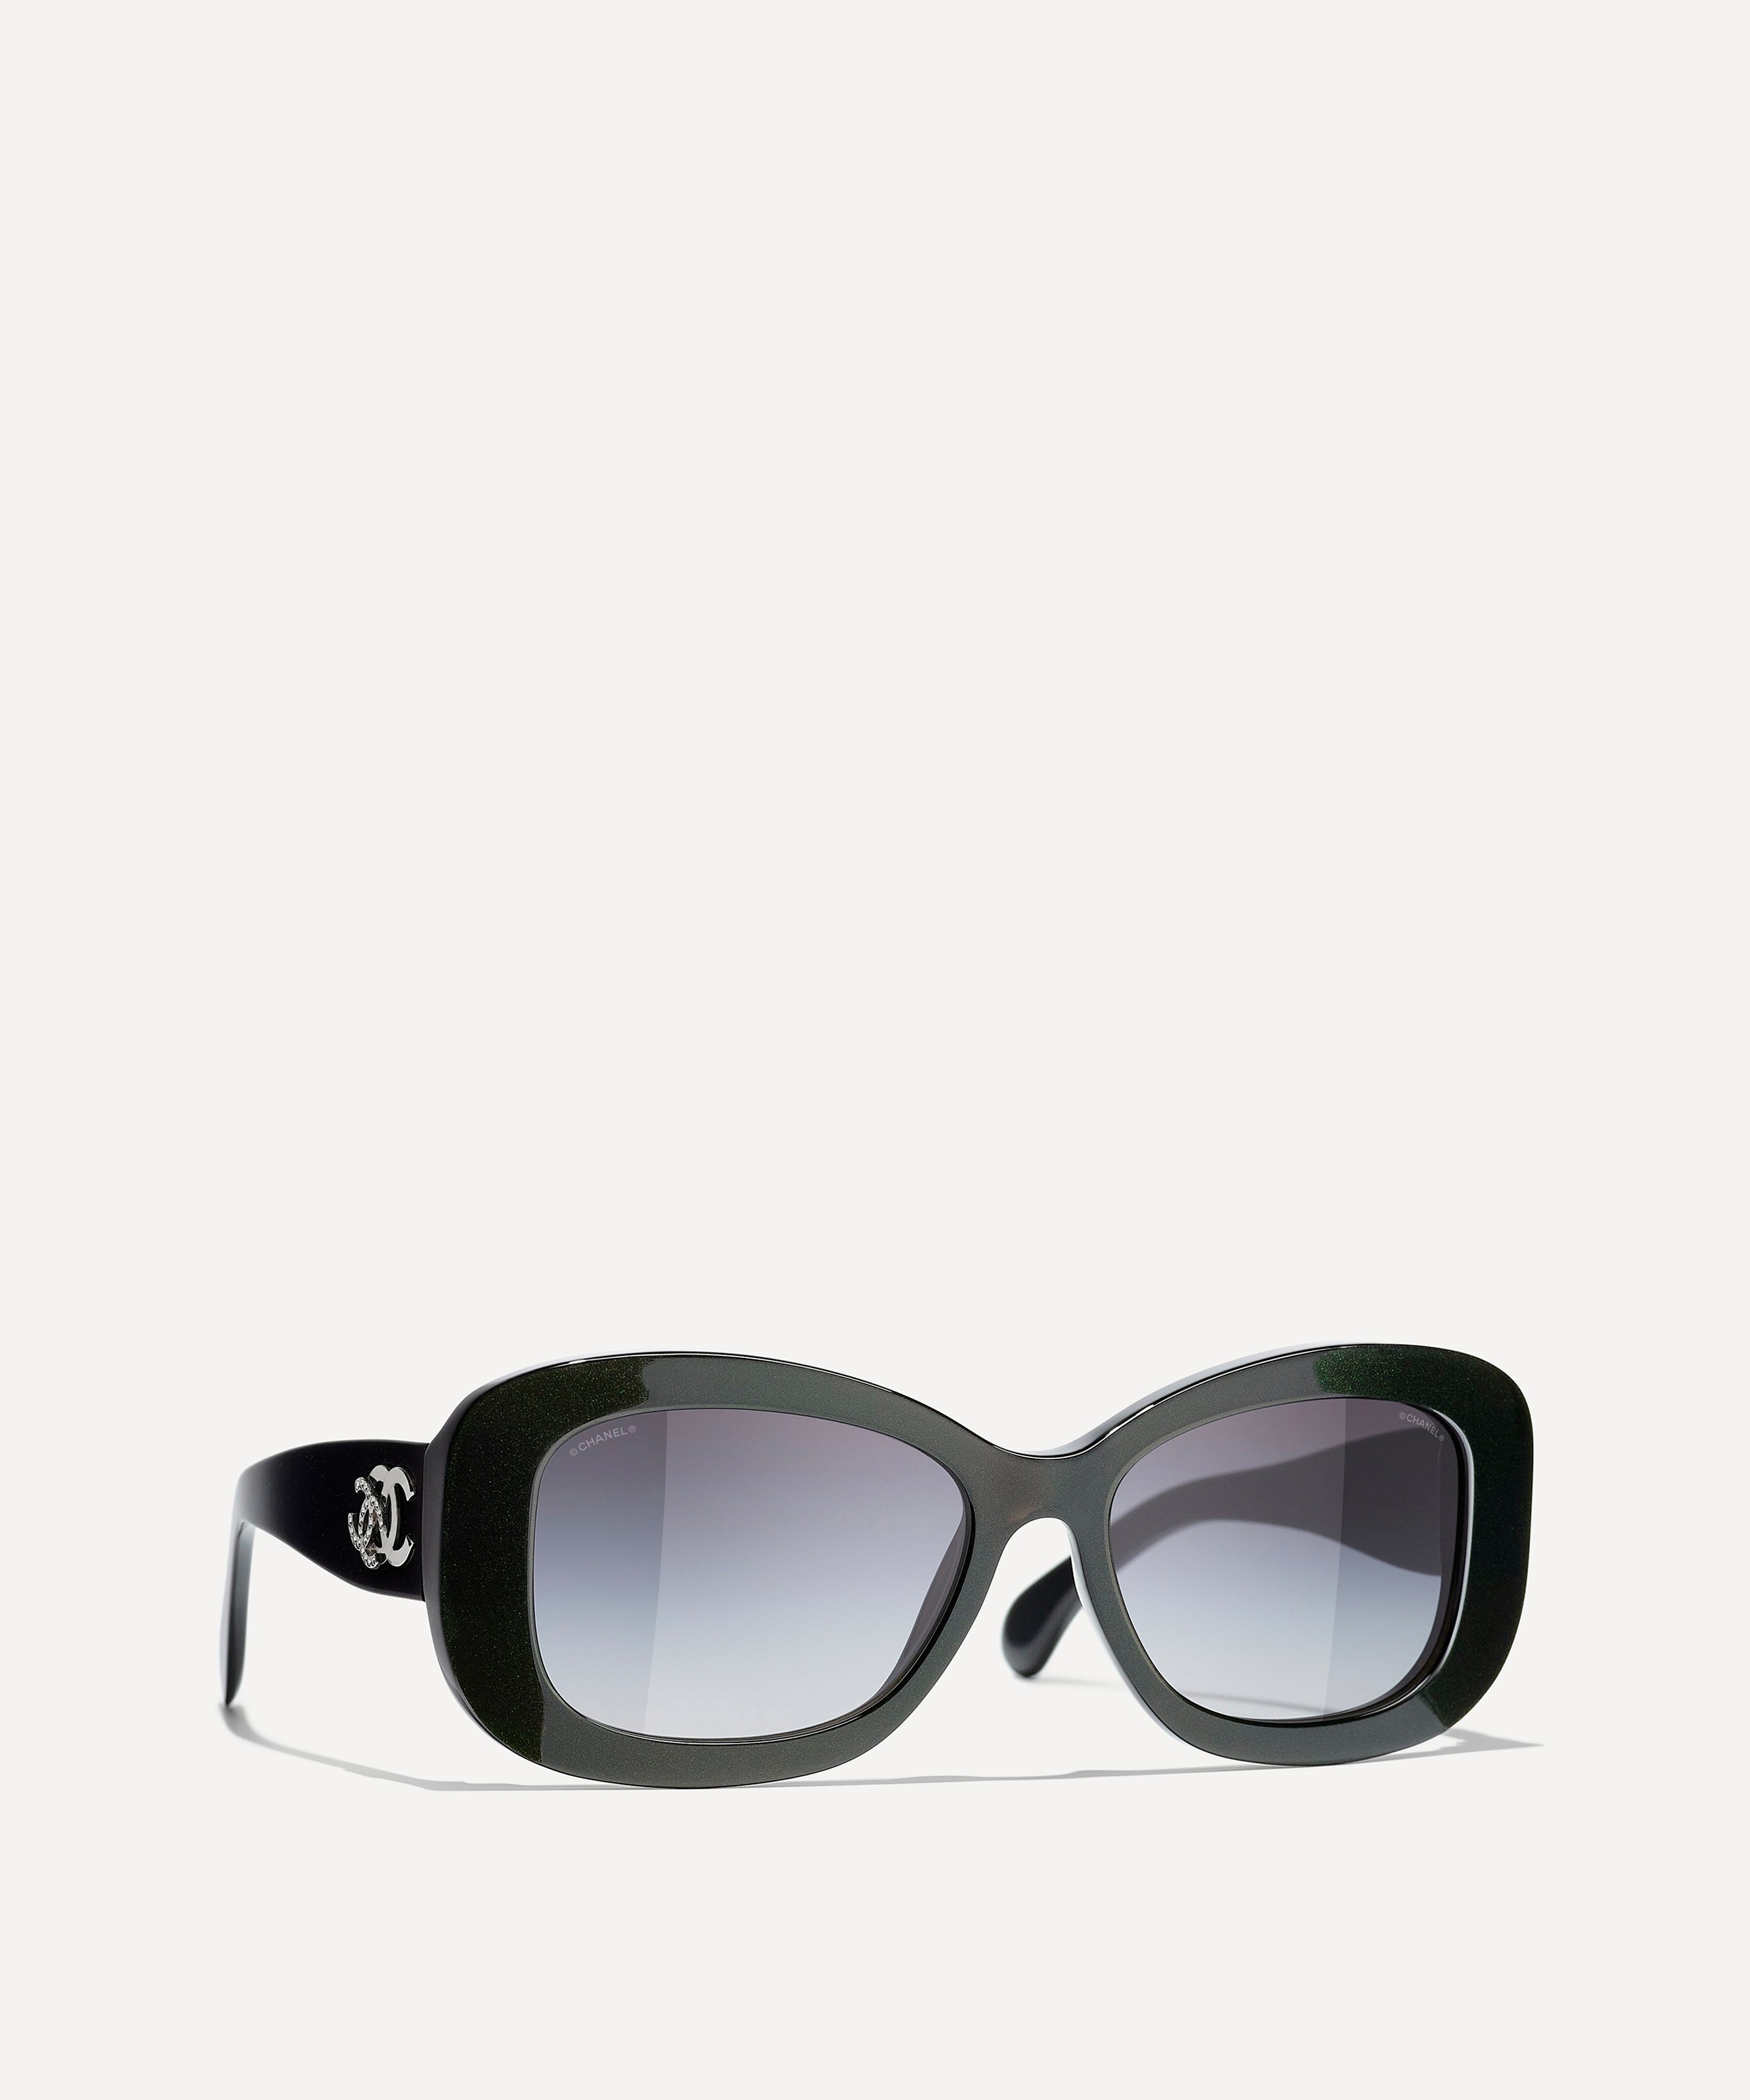 Chanel Black Rectangular Thick Frame Sunglasses with Quilted Arms